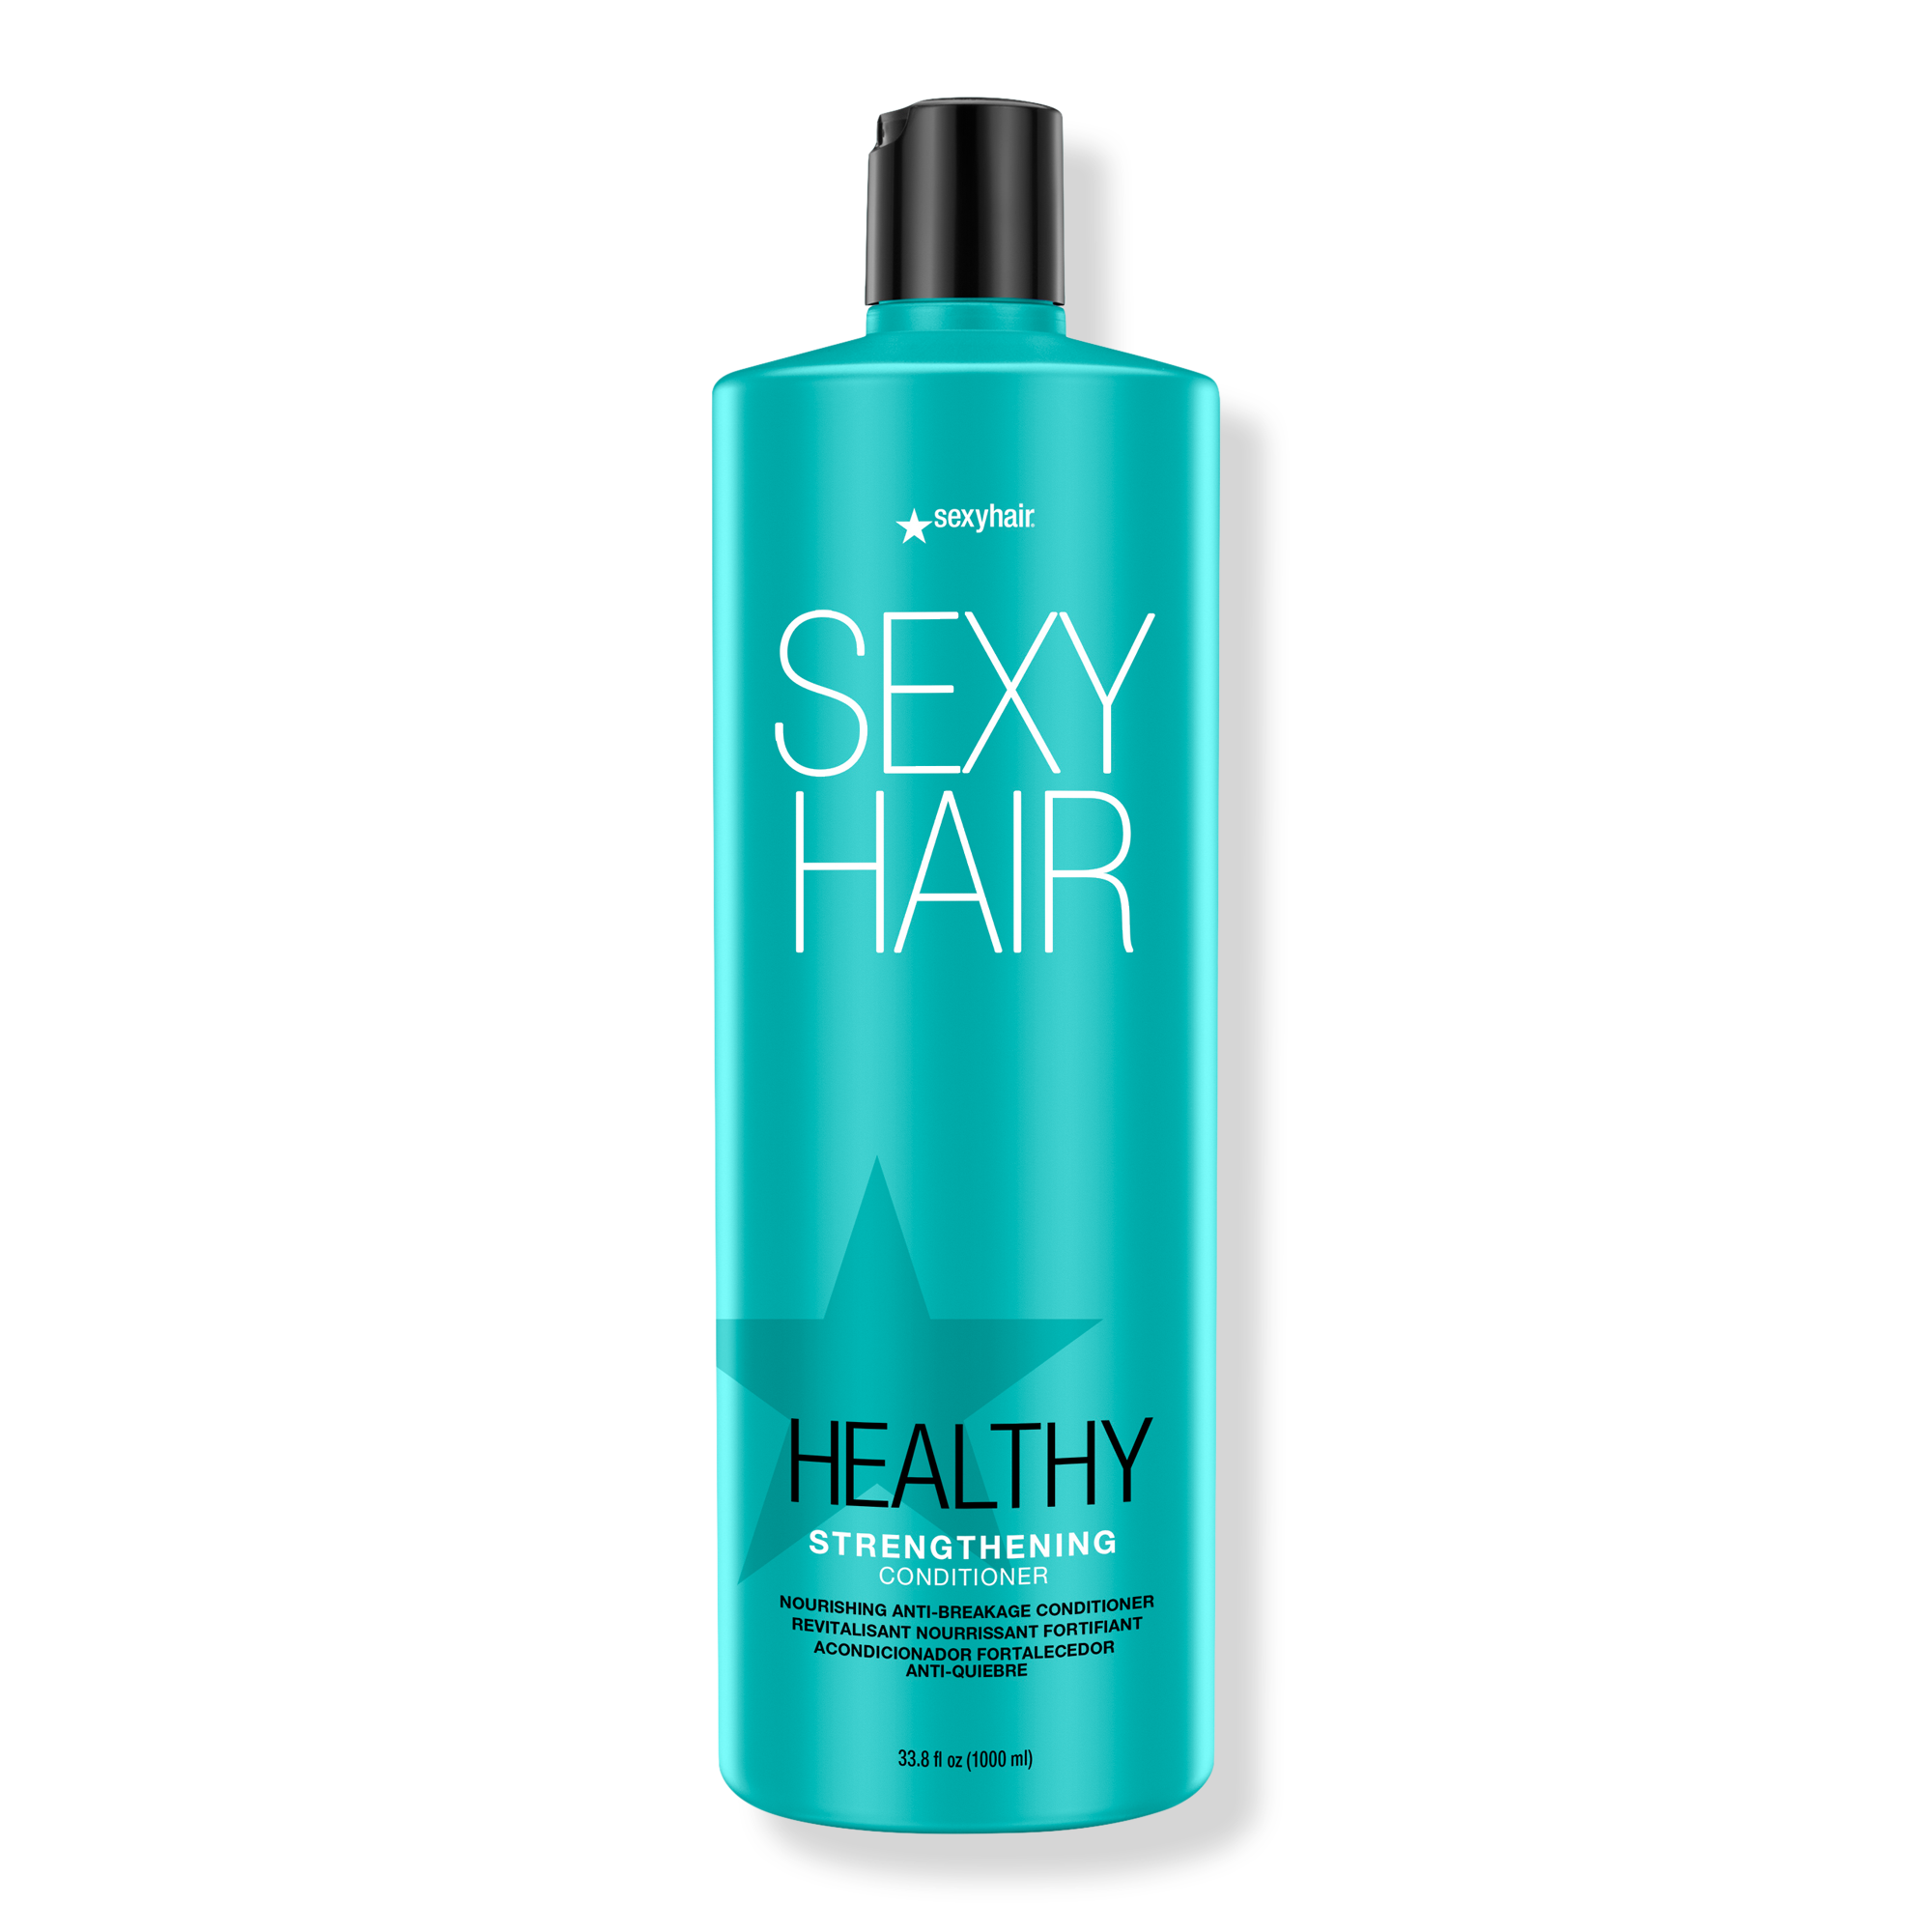 Sexy Hair Healthy SexyHair Strengthening Shampoo and Conditioner Liter Duo / 33.OZ